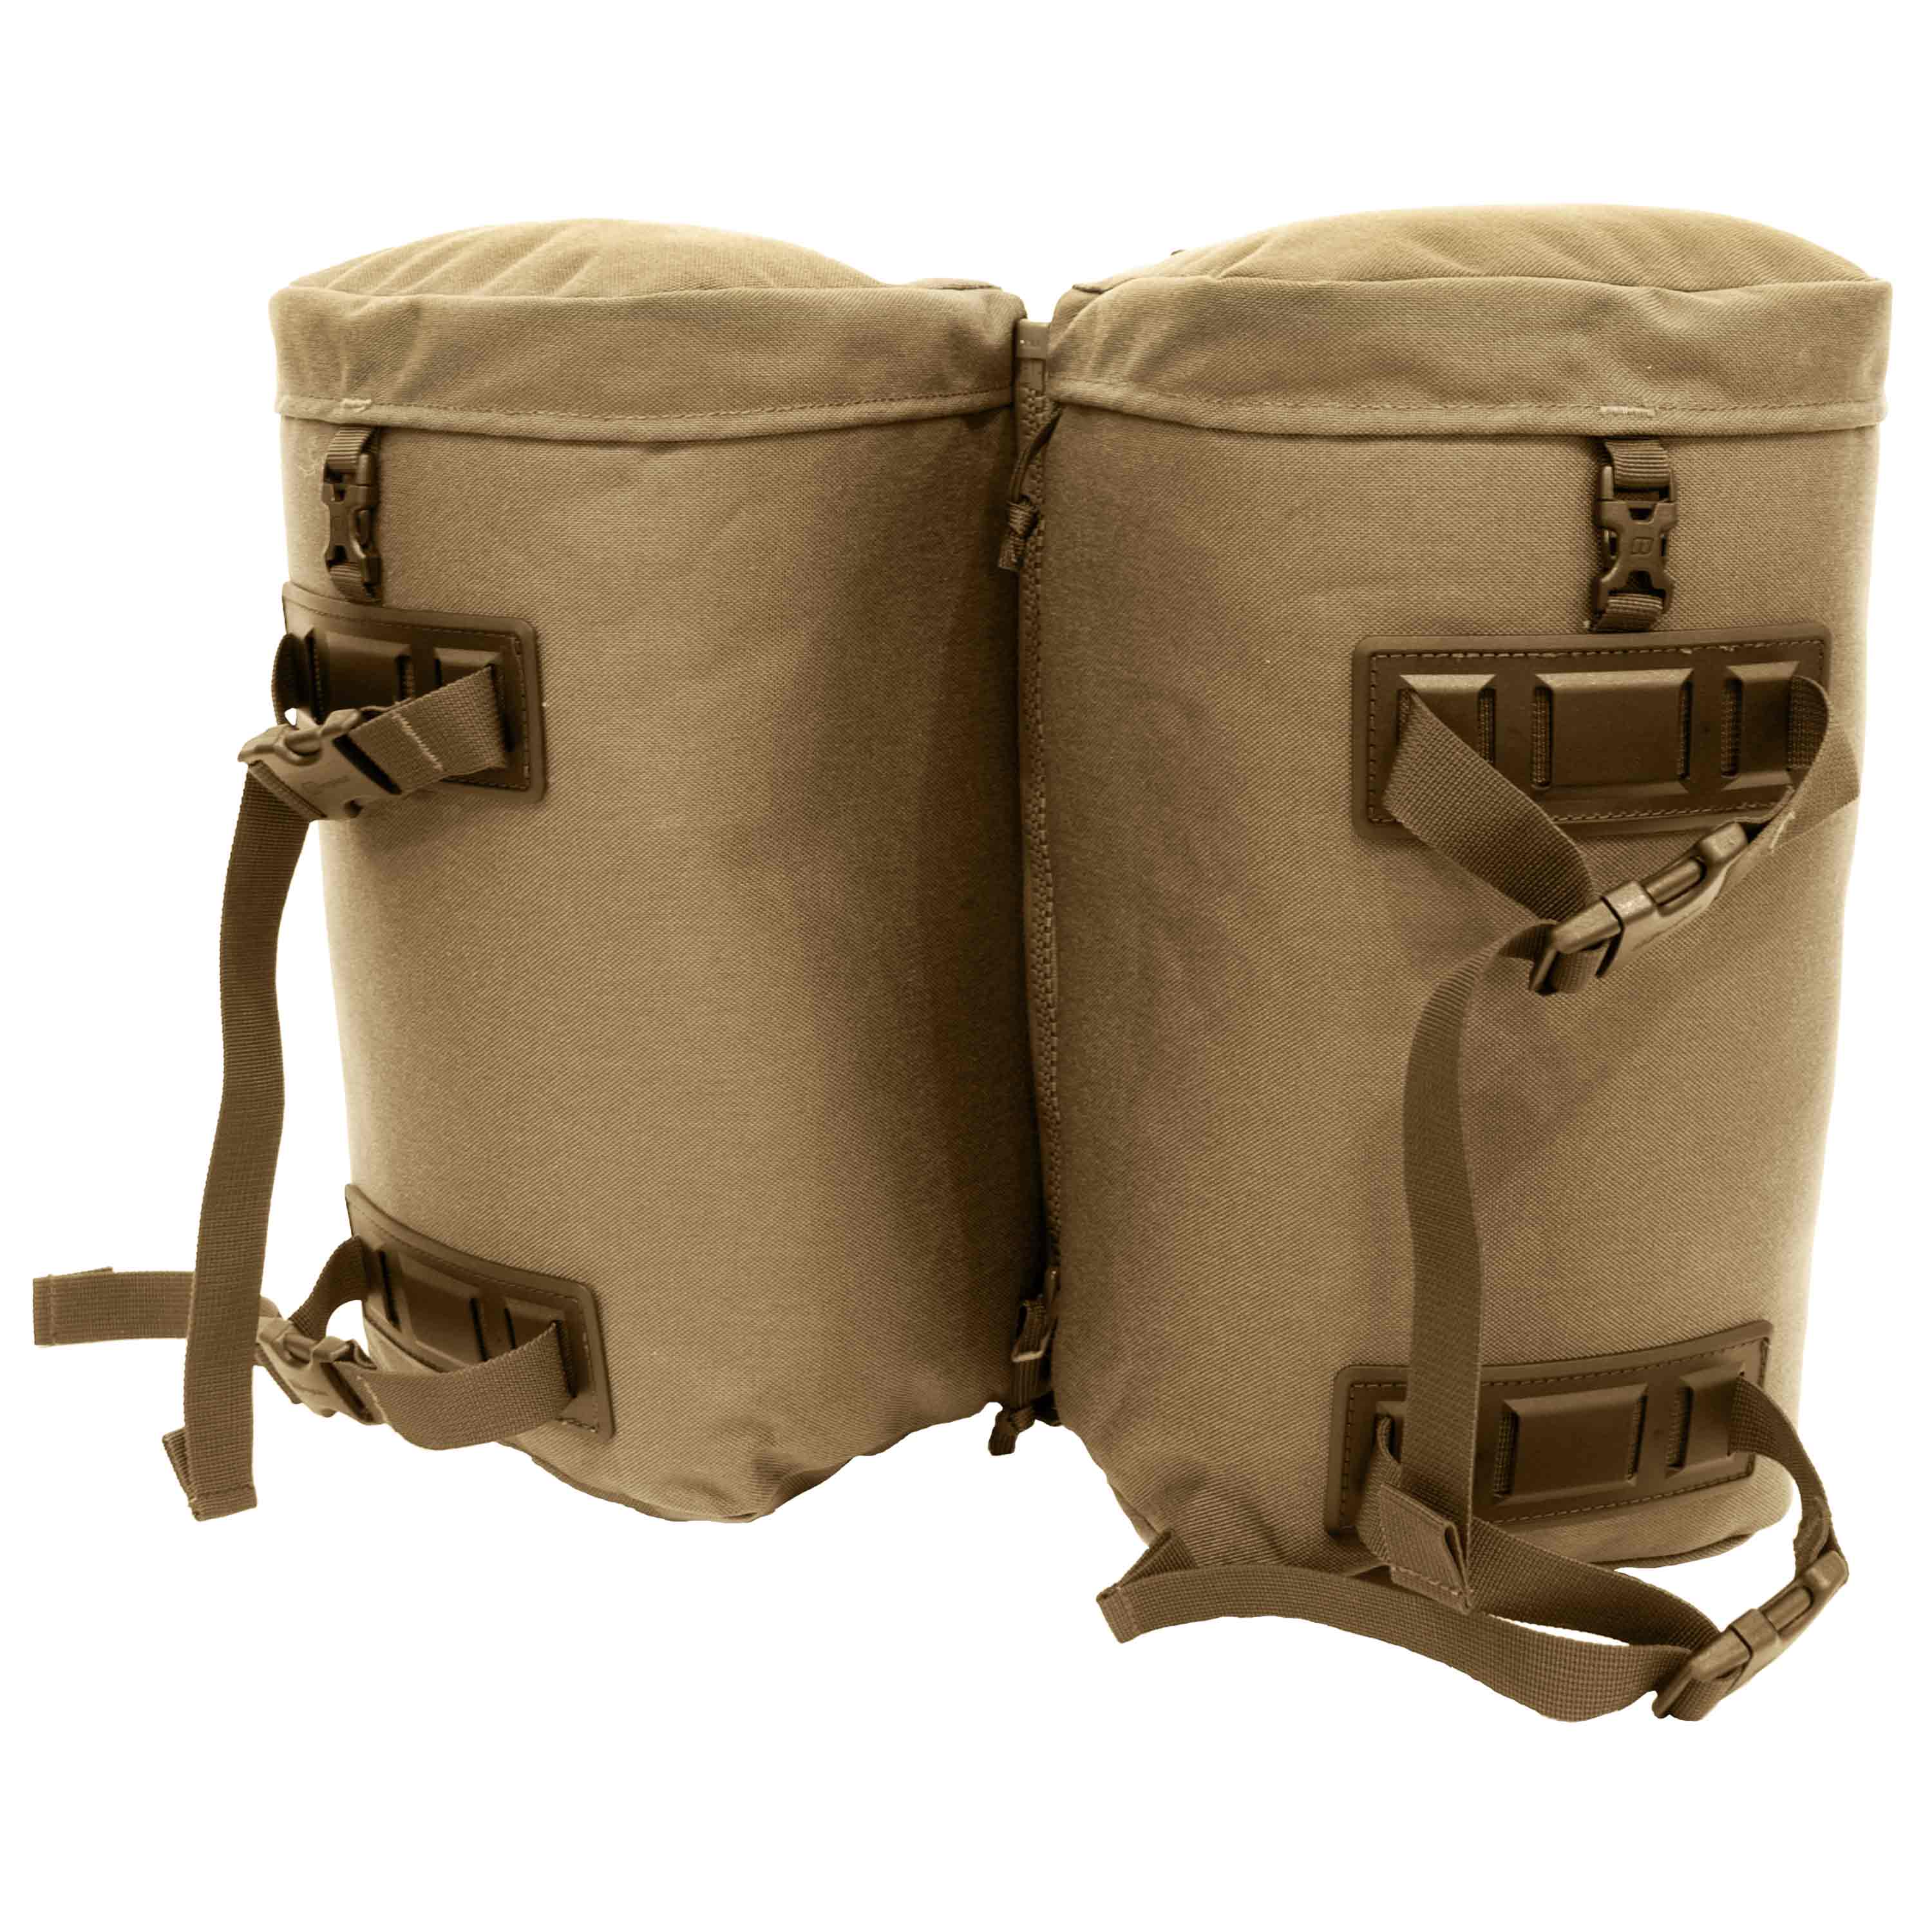 Berghaus MMPS Large Pockets  2x15 Liter in coyote brown 